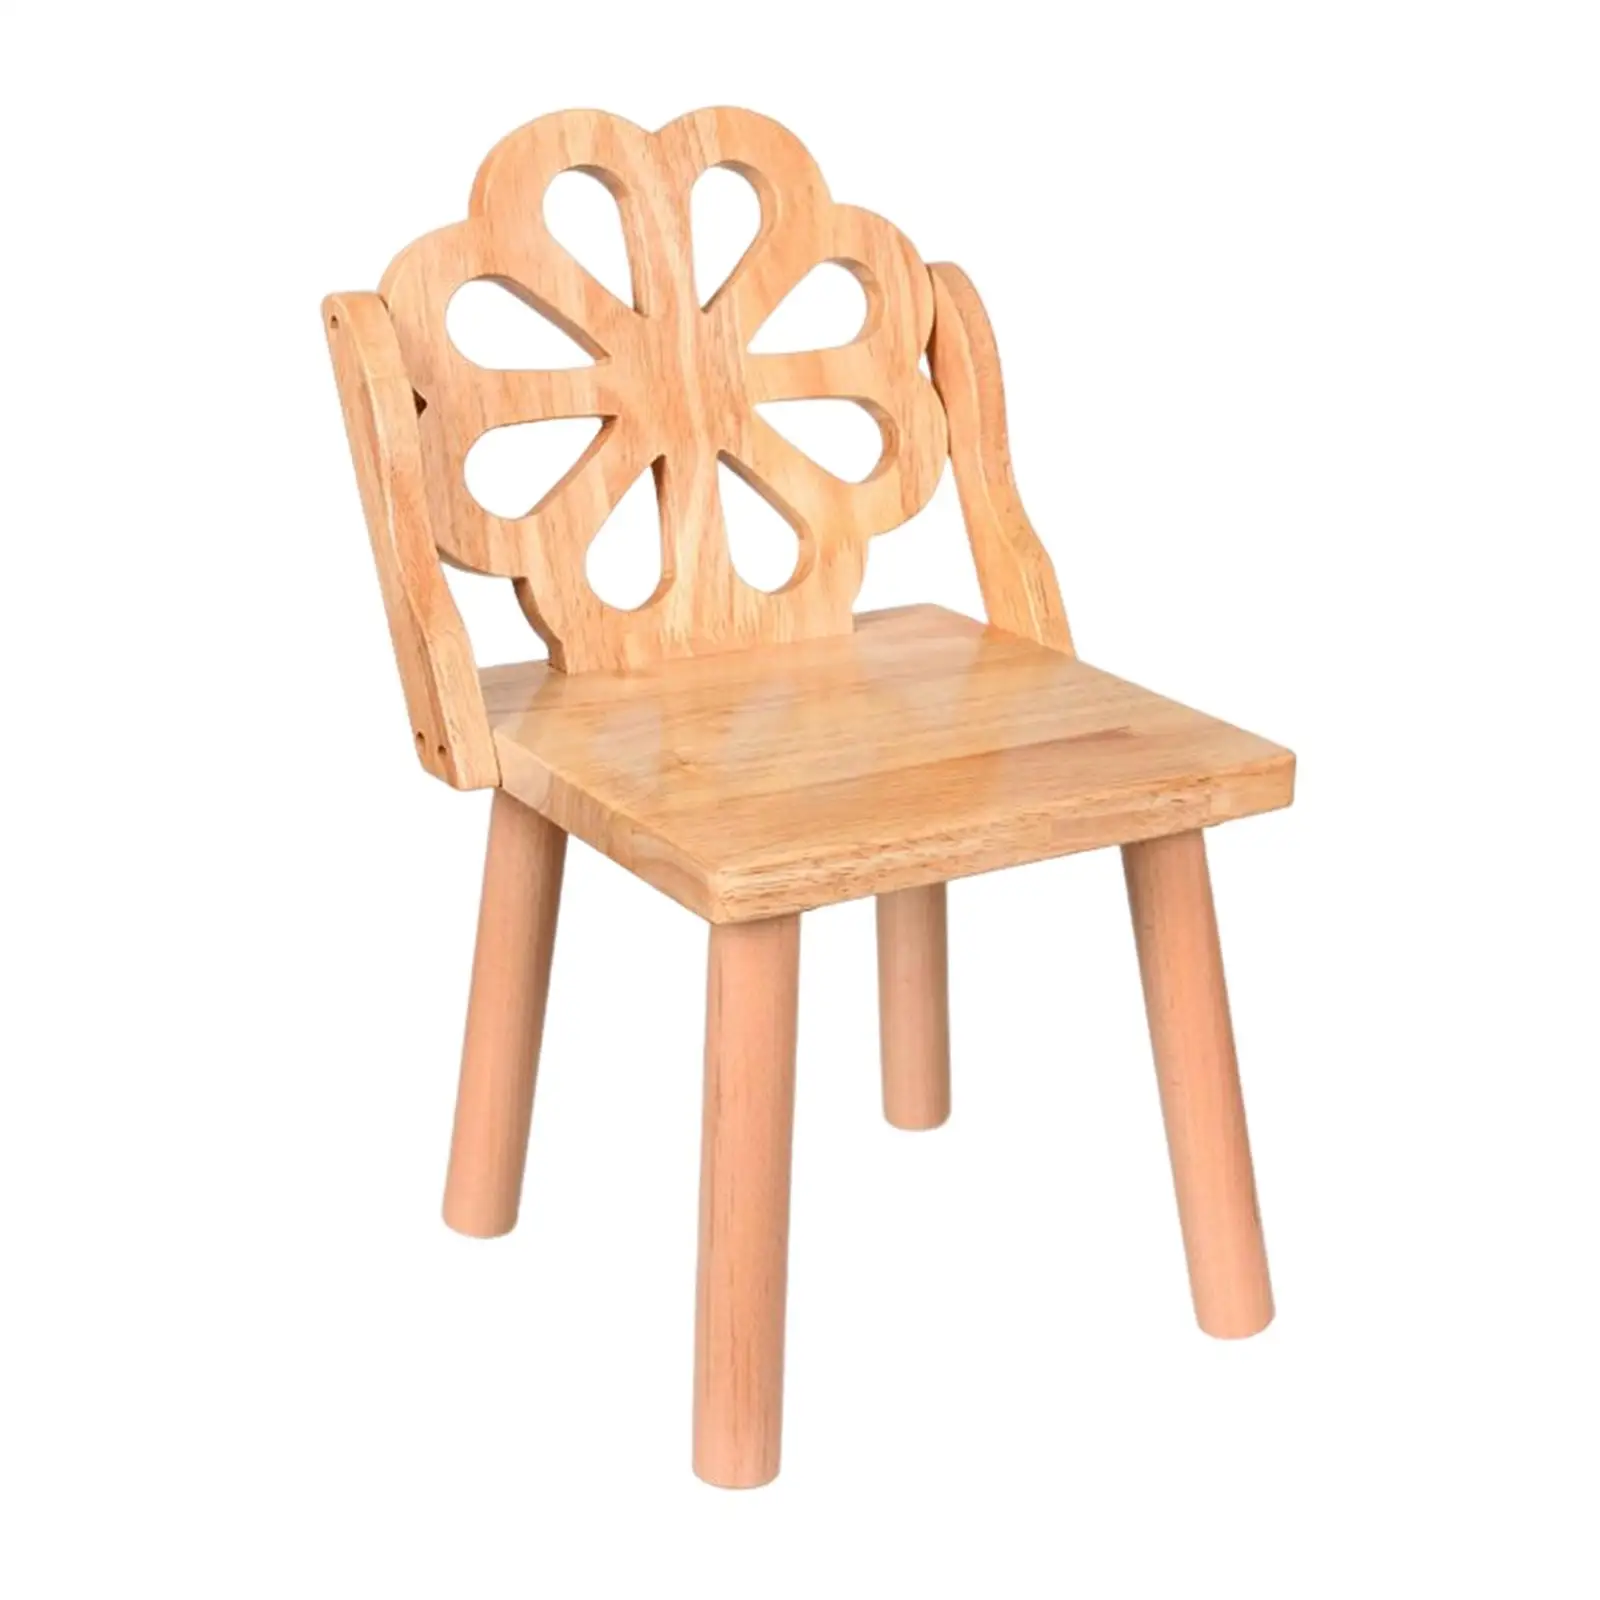 Household Removable Wooden Child Stool Heavy Duty Lightweight Durable Wood Wooden Kindergarten game for Bedside Bathroom